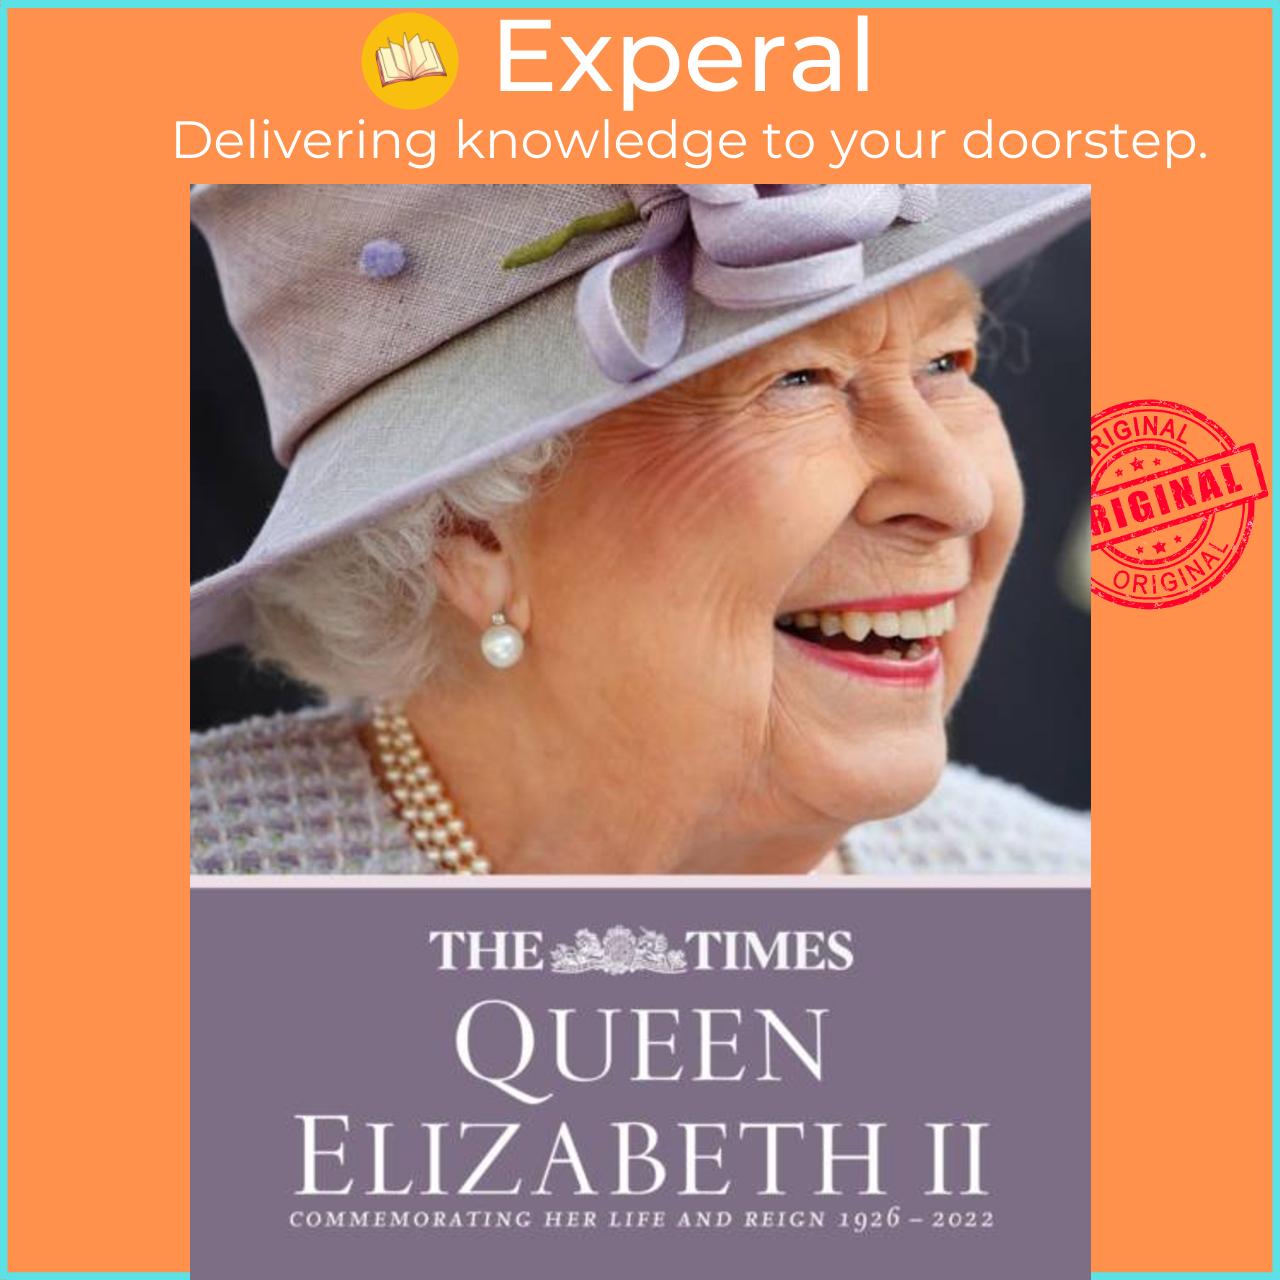 Hình ảnh Sách - The Times Queen Elizabeth II - Commemorating Her Life and Reign 1926 - 202 by Times Books (UK edition, hardcover)